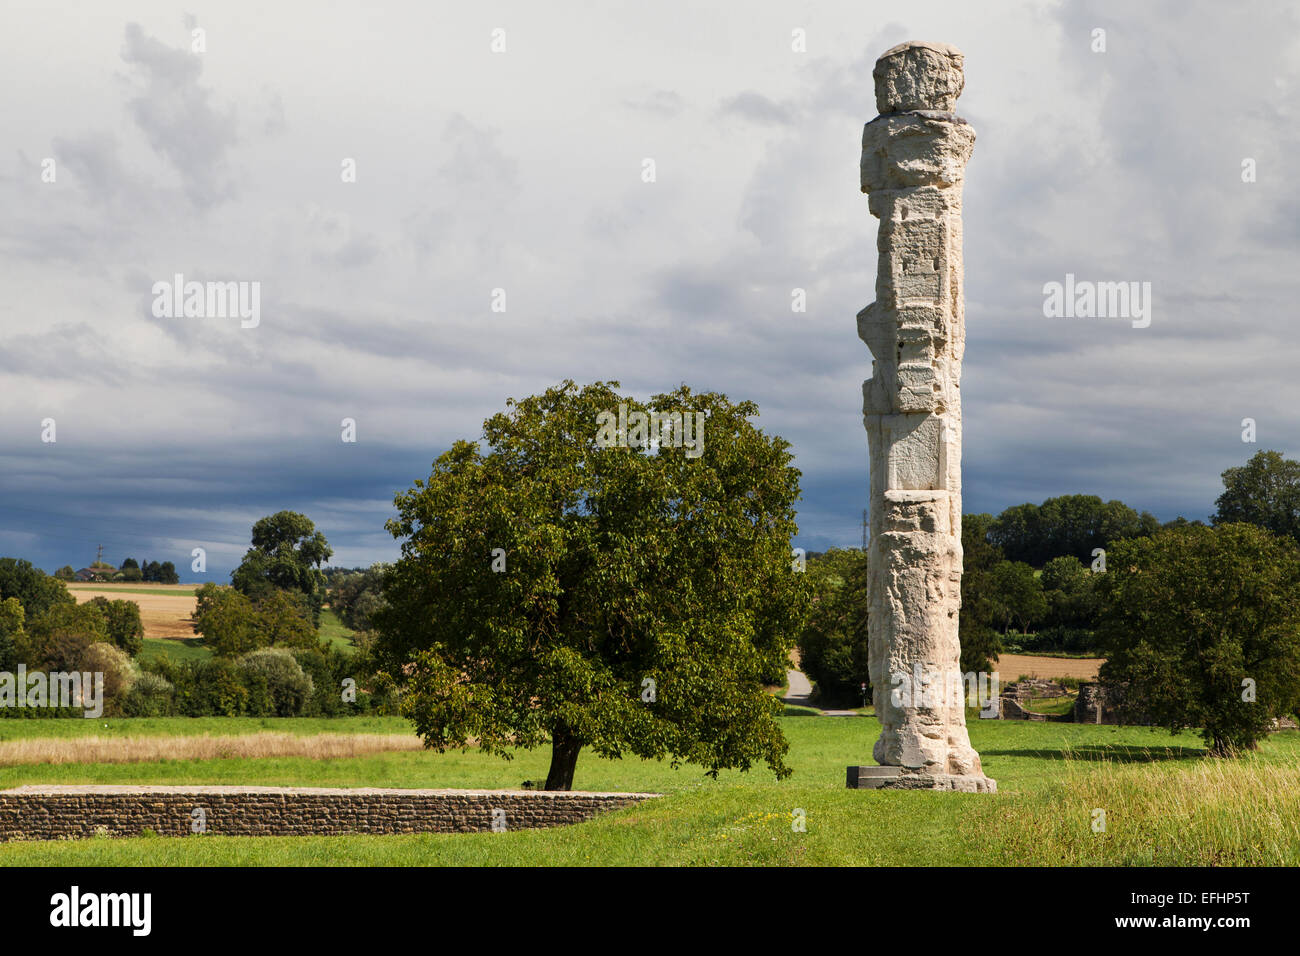 Ruined pillar of the ancient temple of Cigognier in Avenches, Switzerland. Stock Photo